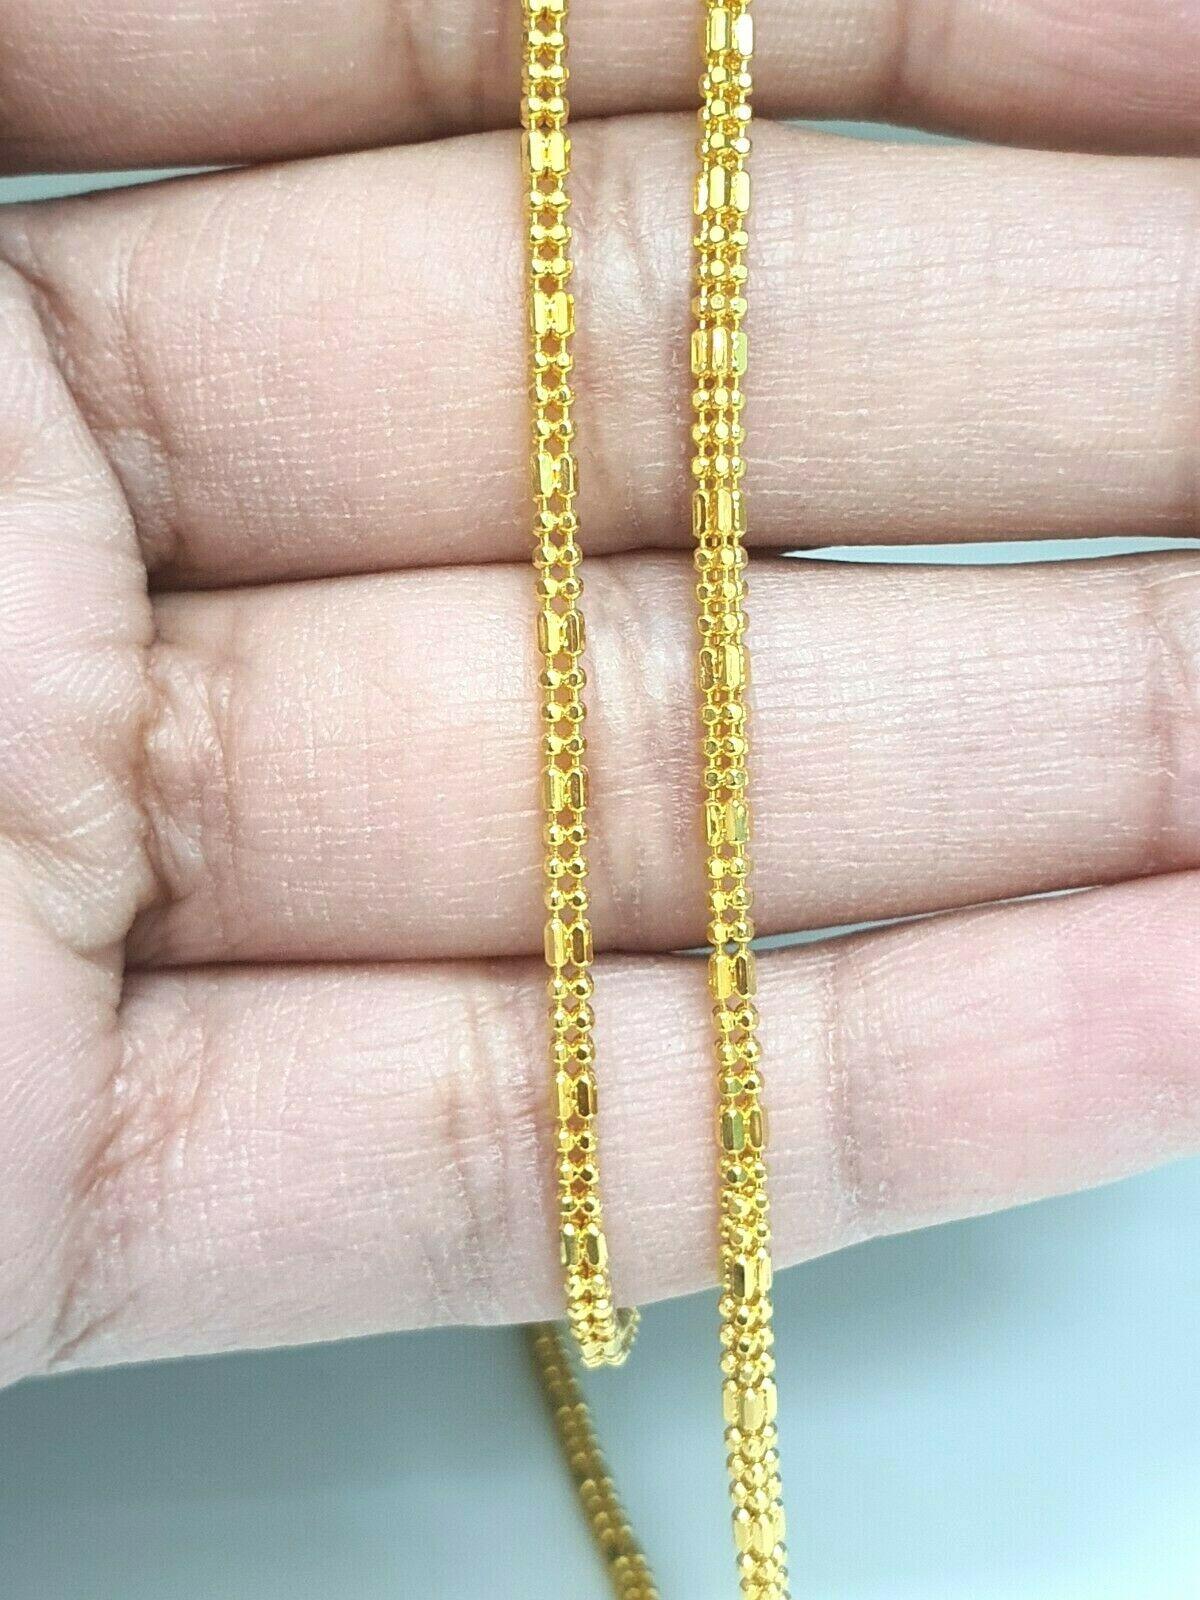 22 Inches 22k Yellow Gold Handmade Fabulous Hollow Lotus Chain Necklace  Excellent Gold Unisex Chain Ch144 - Etsy | Mens gold chain necklace, Gold  chain jewelry, Gold chain design